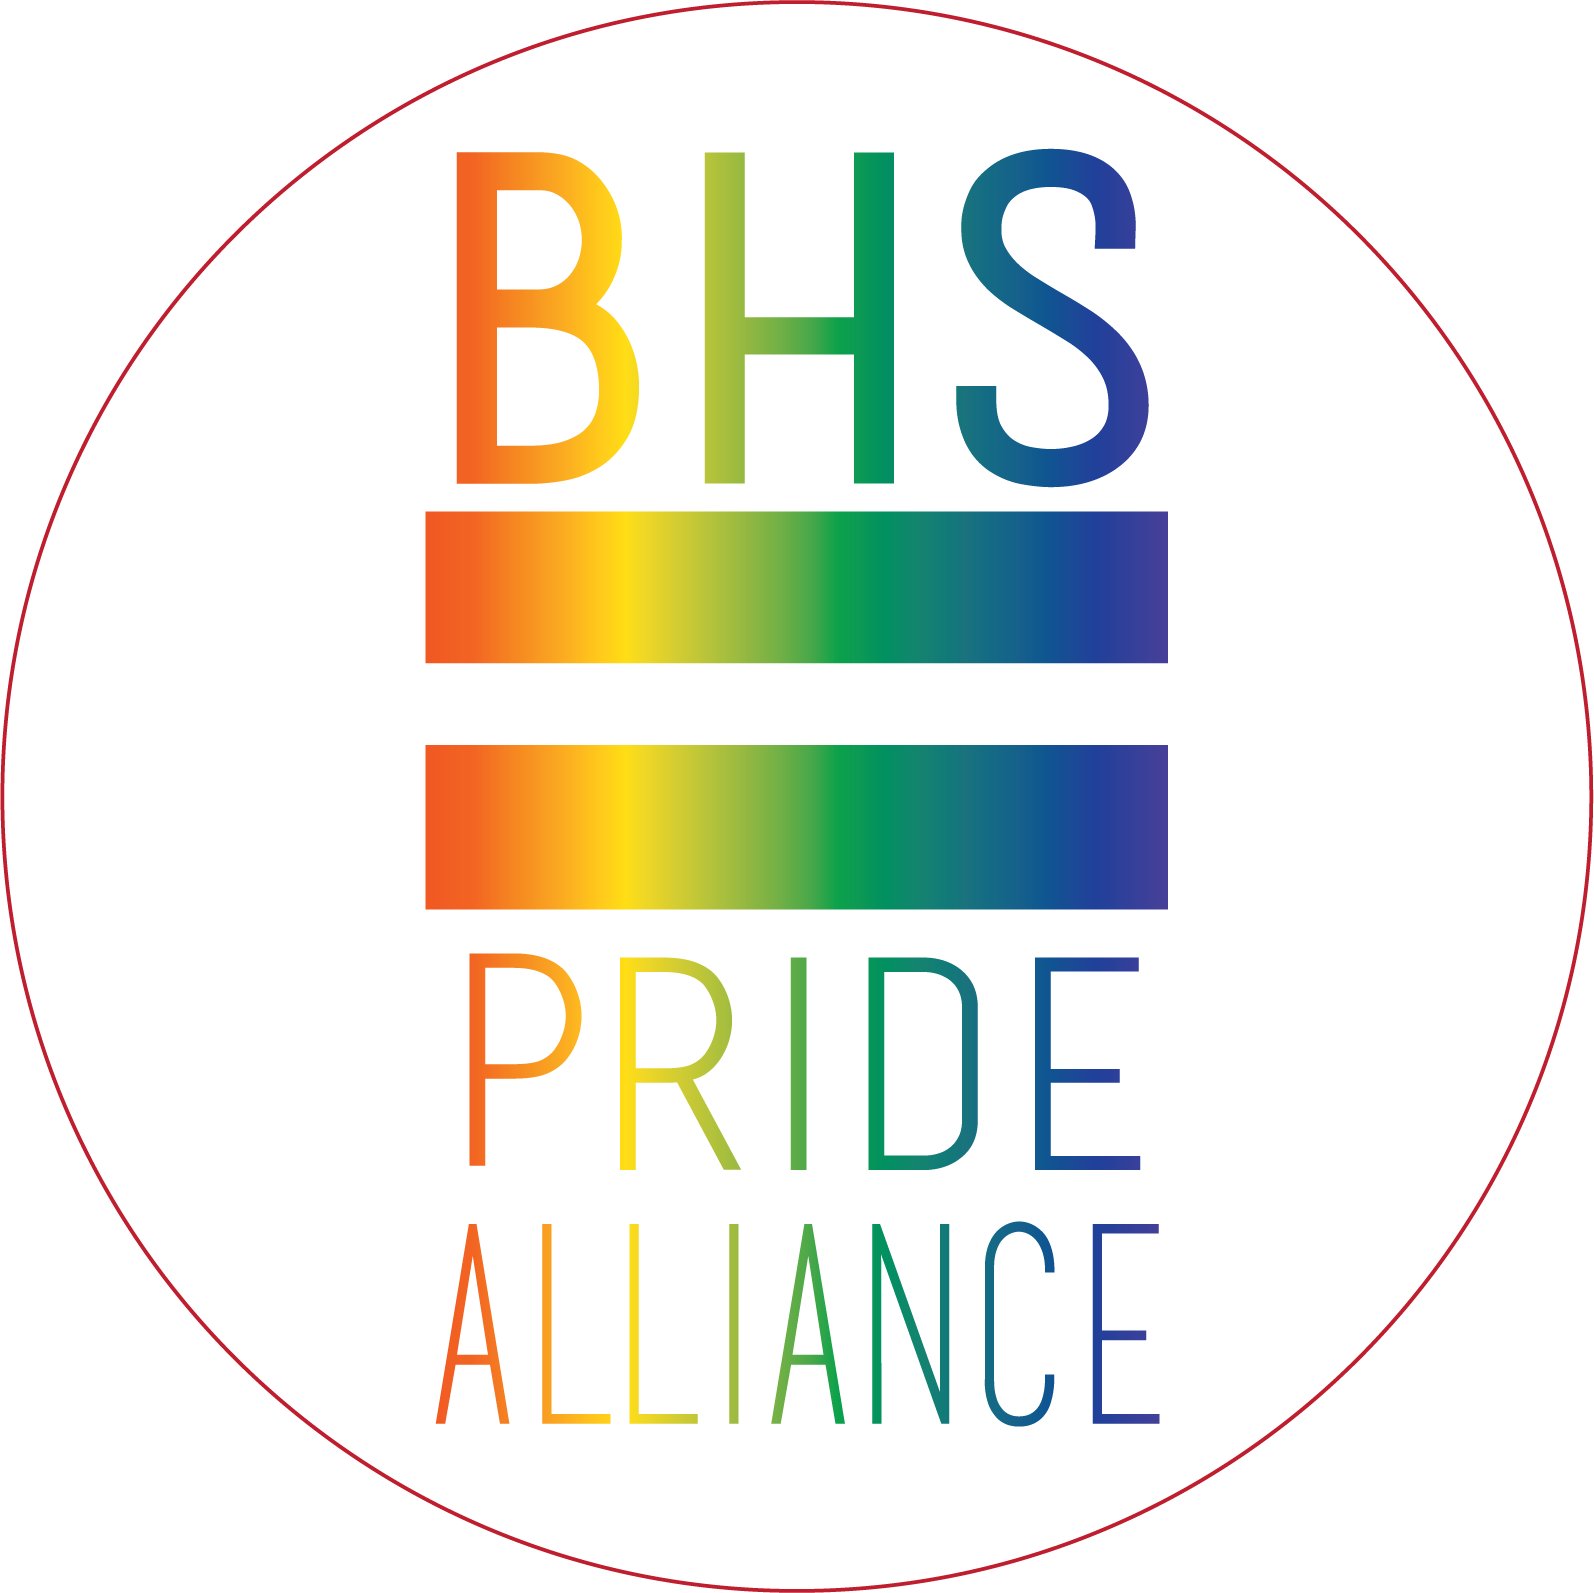 Showing pride at BHS